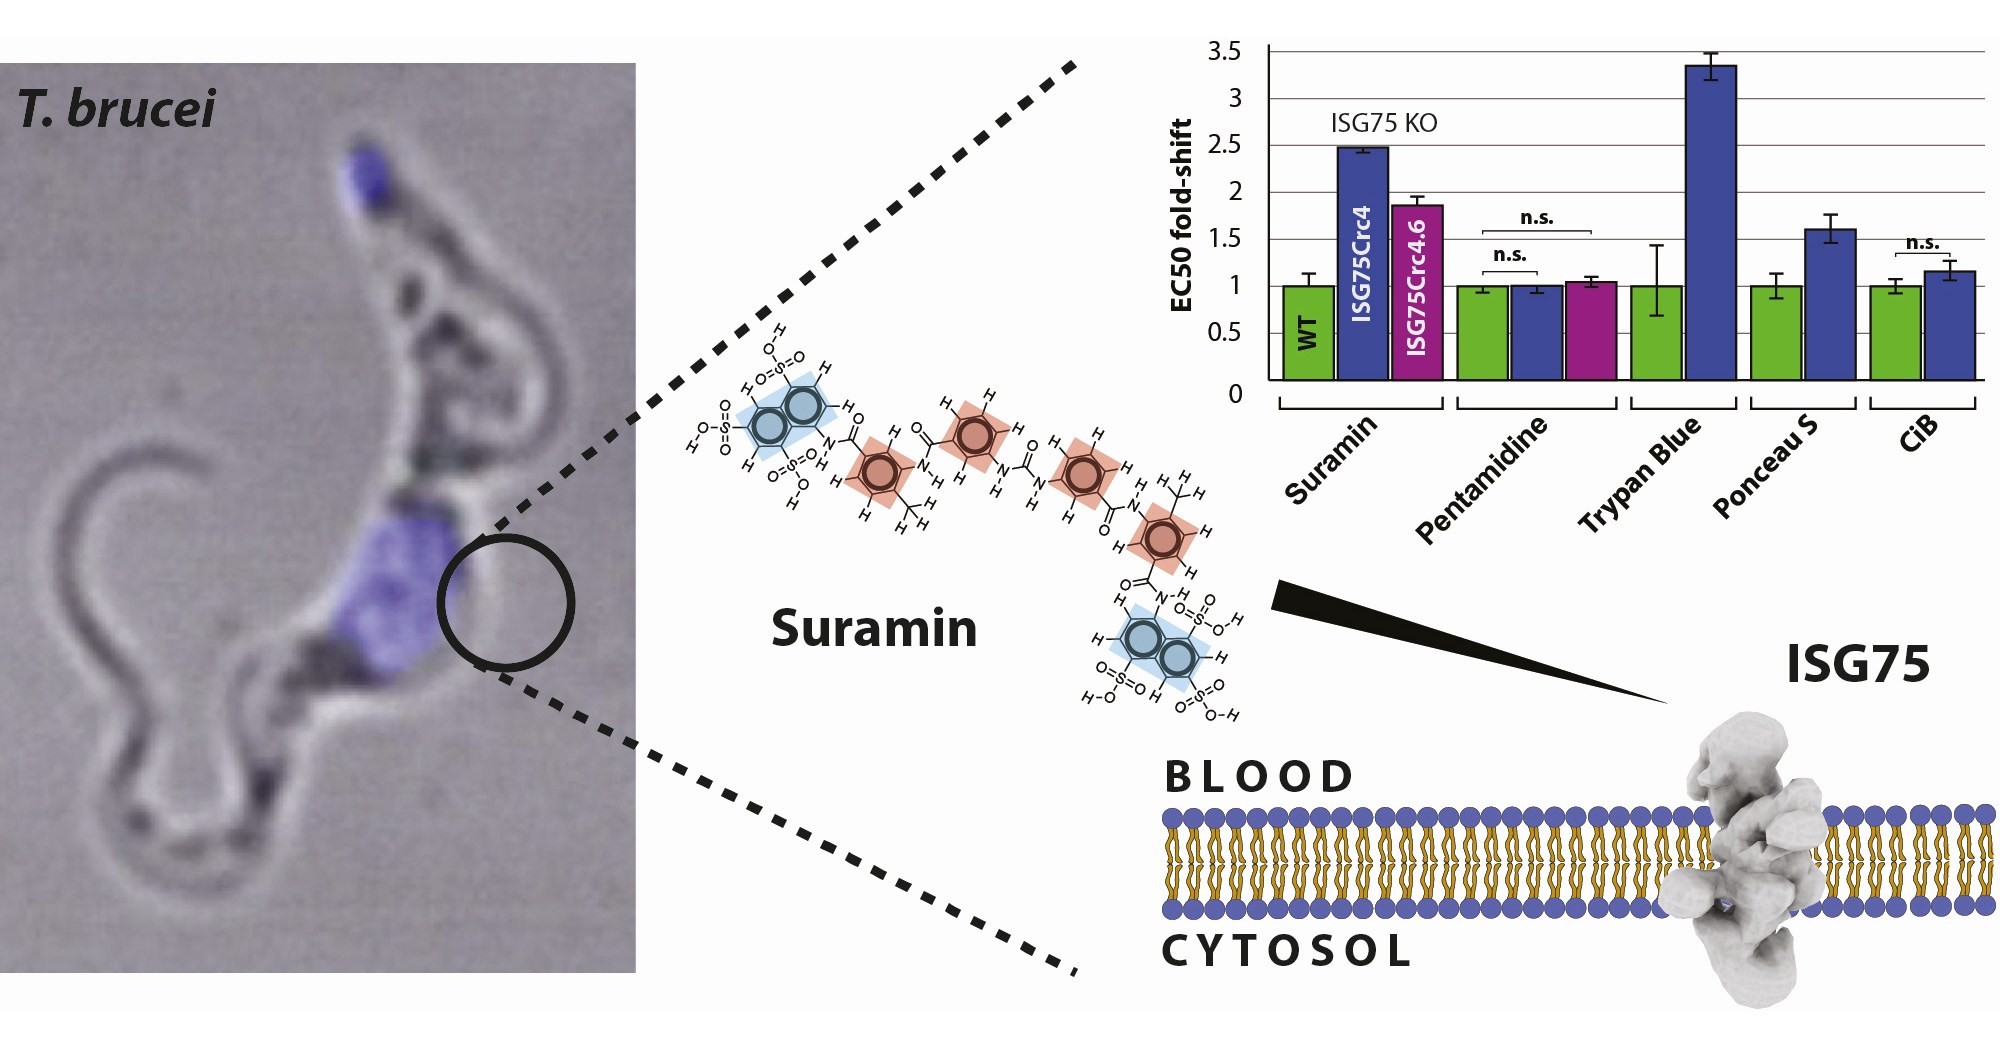 The role of invariant surface glycoprotein 75 in xenobiotic acquisition by African trypanosomes